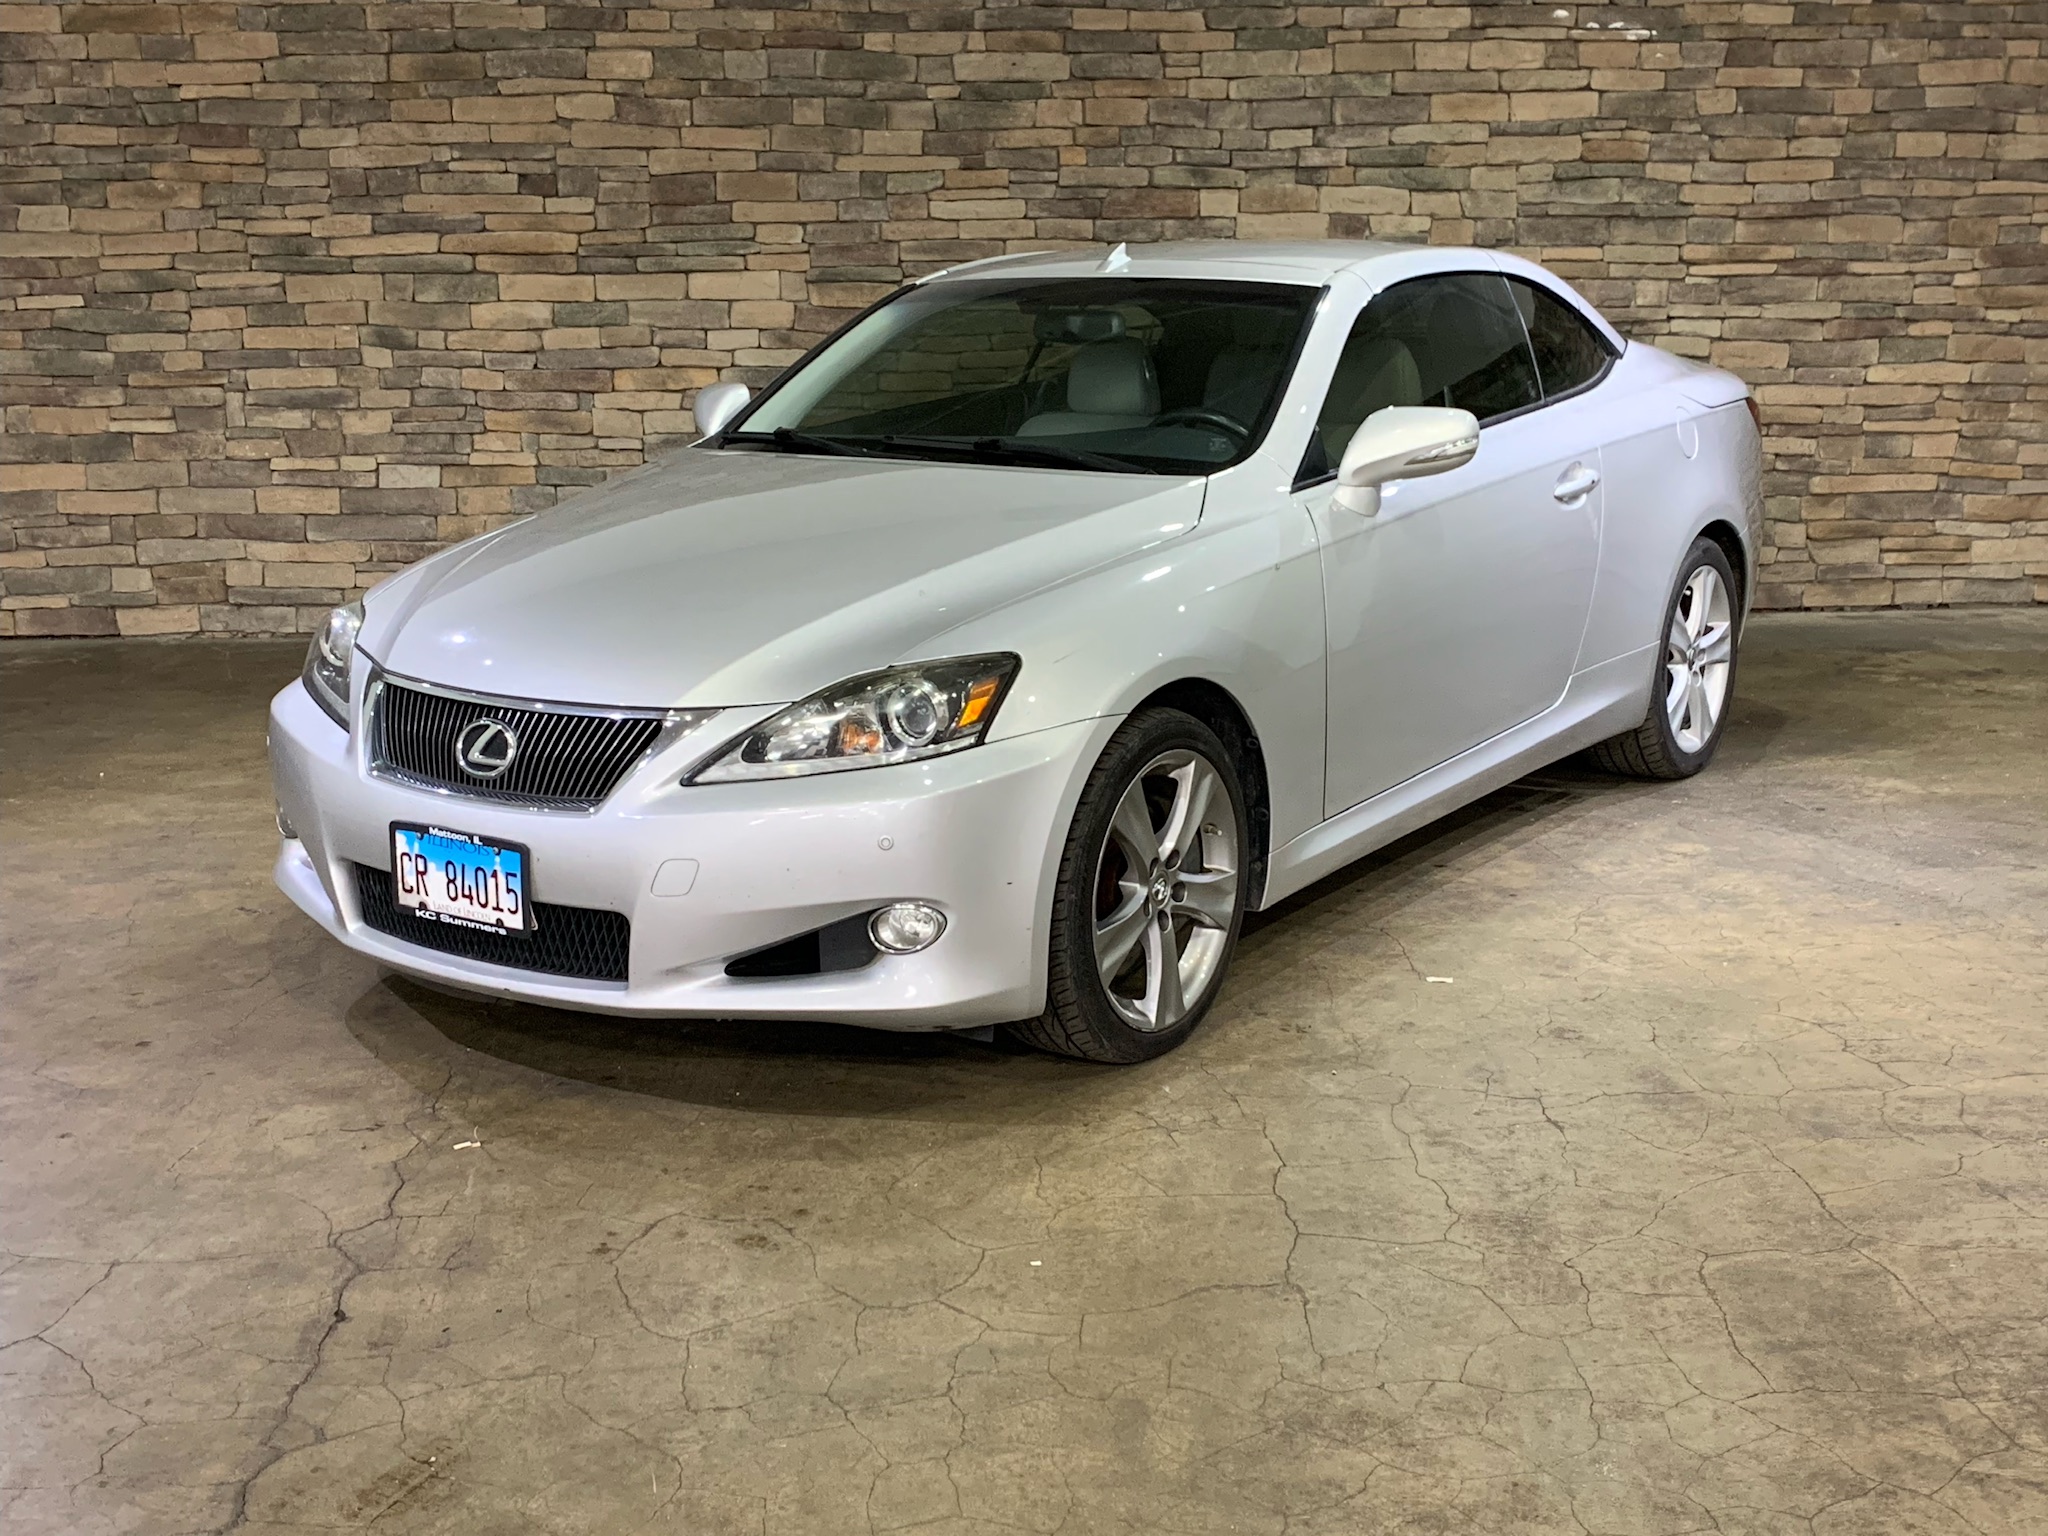 Used 2012 Lexus IS 350C for Sale (Test Drive at Home) - Kelley Blue Book